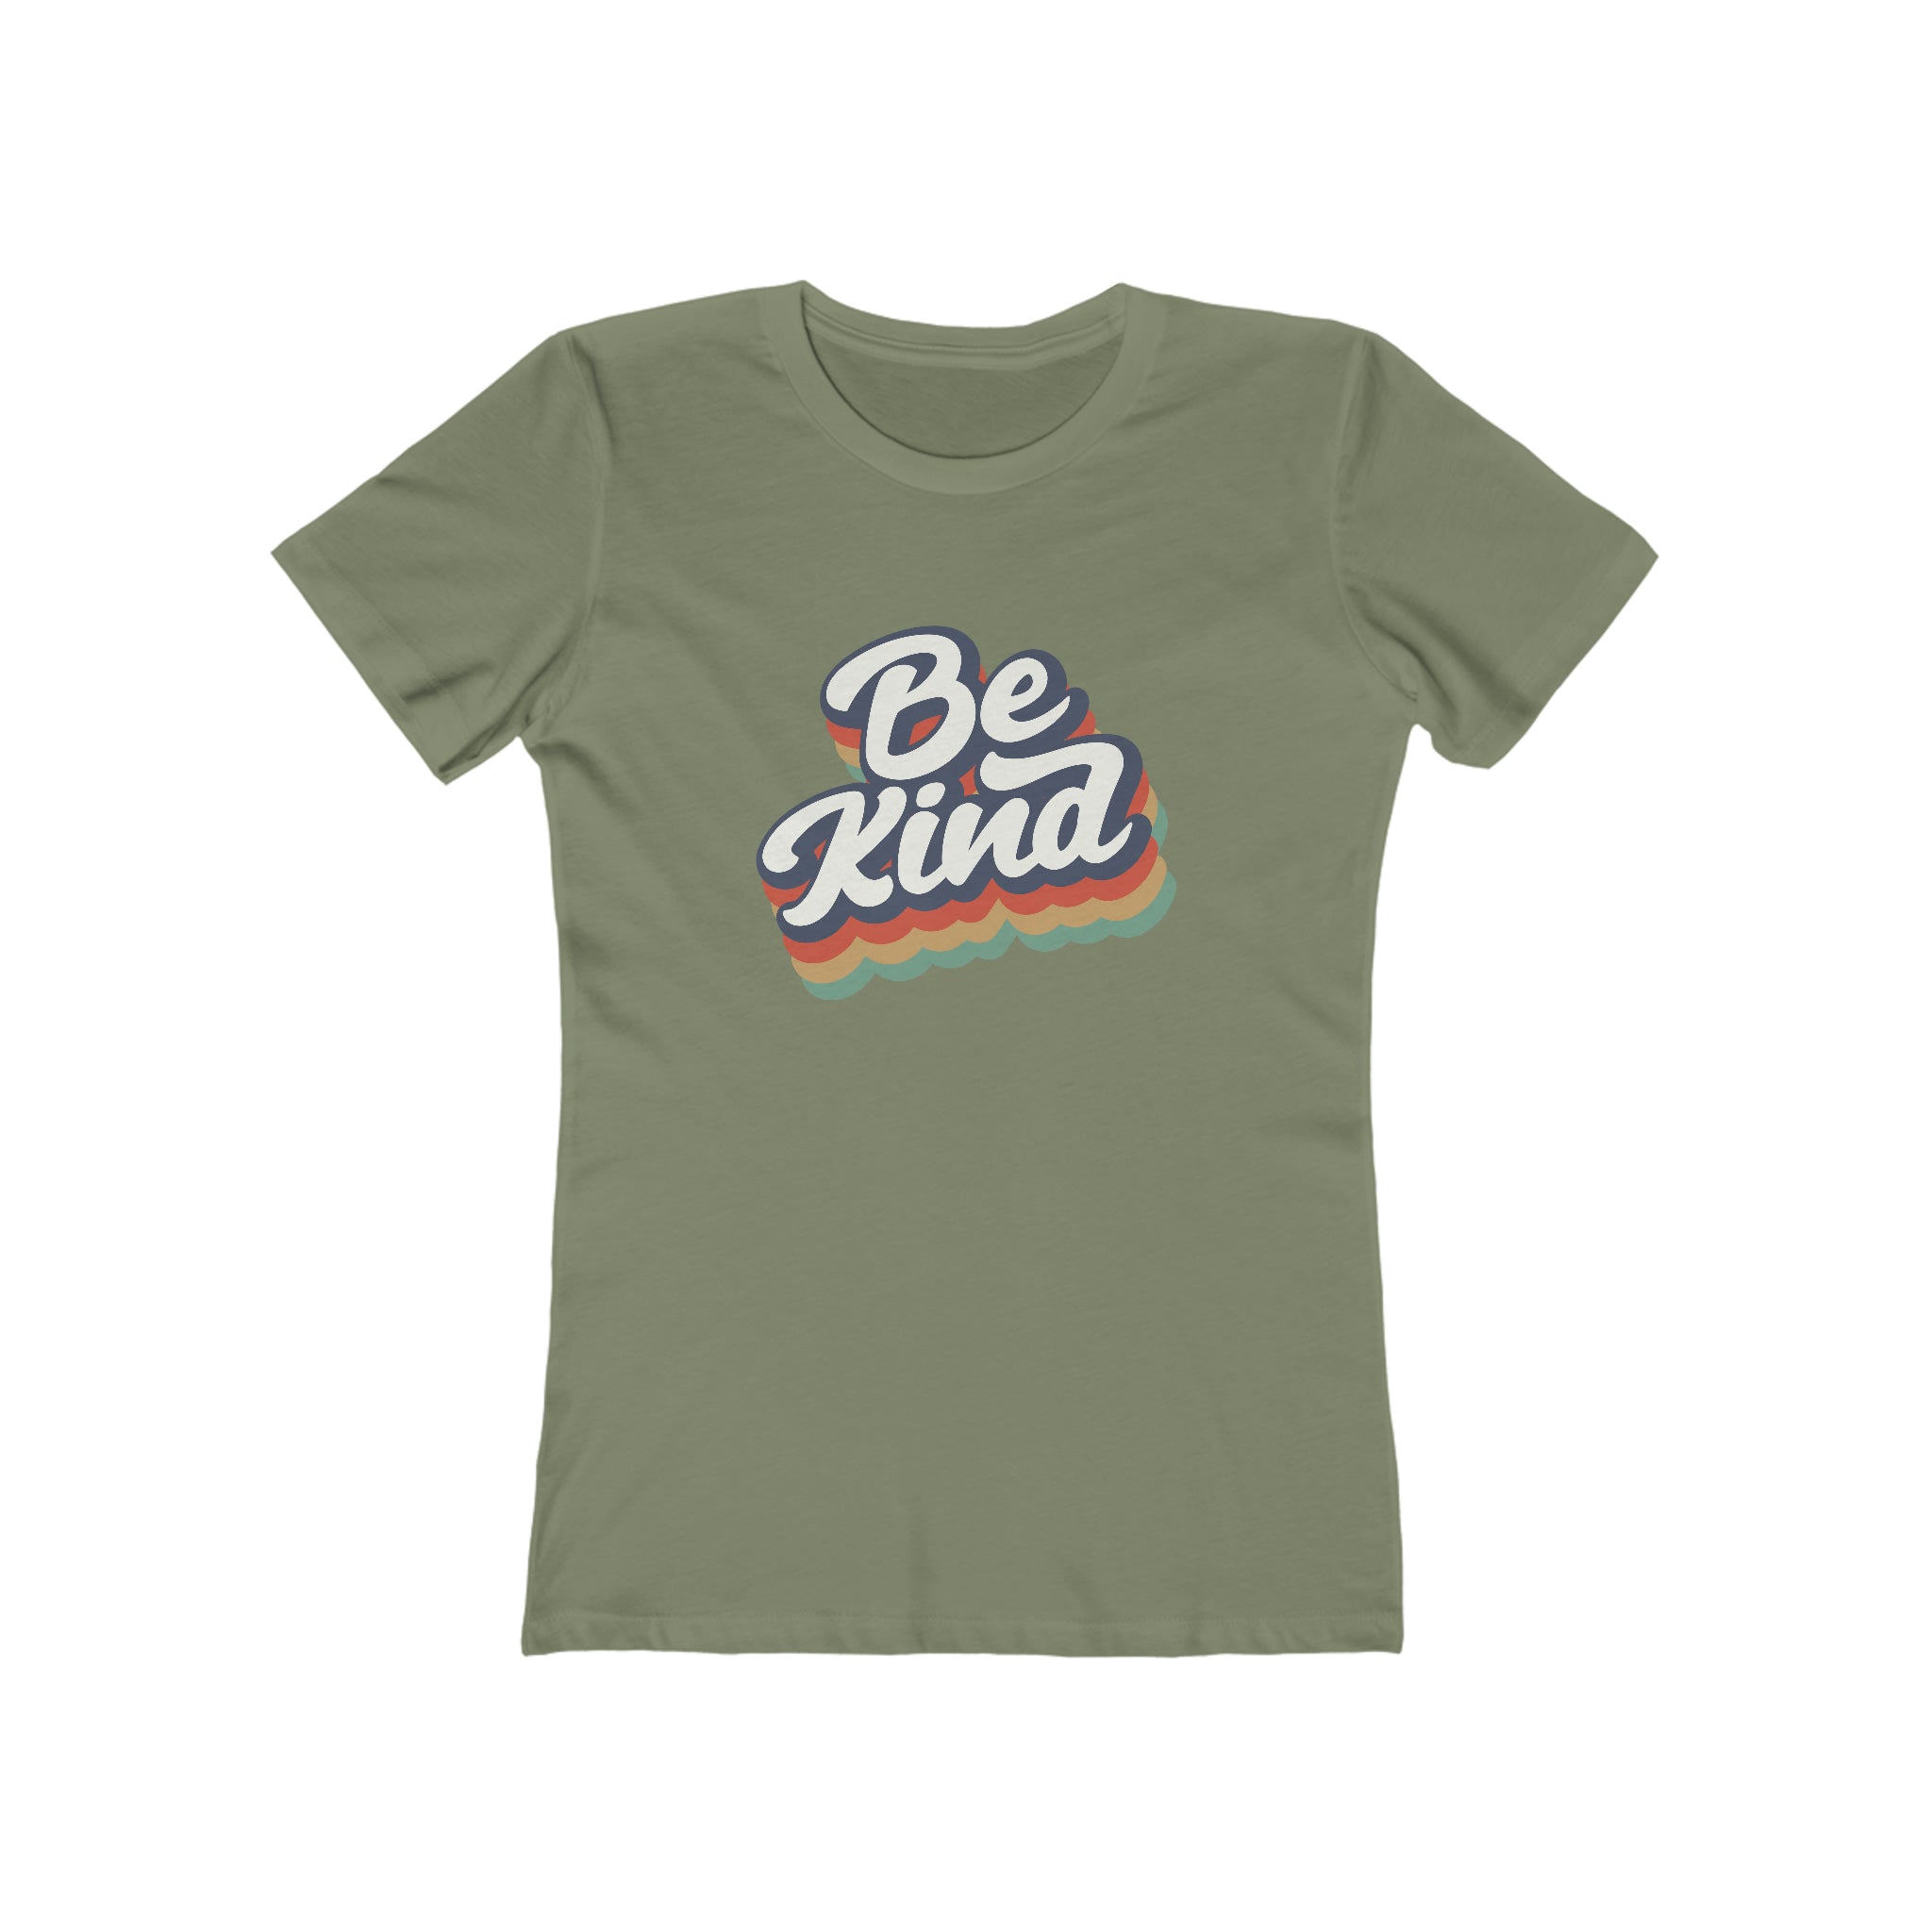 Kindness In The Front - Be Kind : Women's 100% Cotton T-Shirt